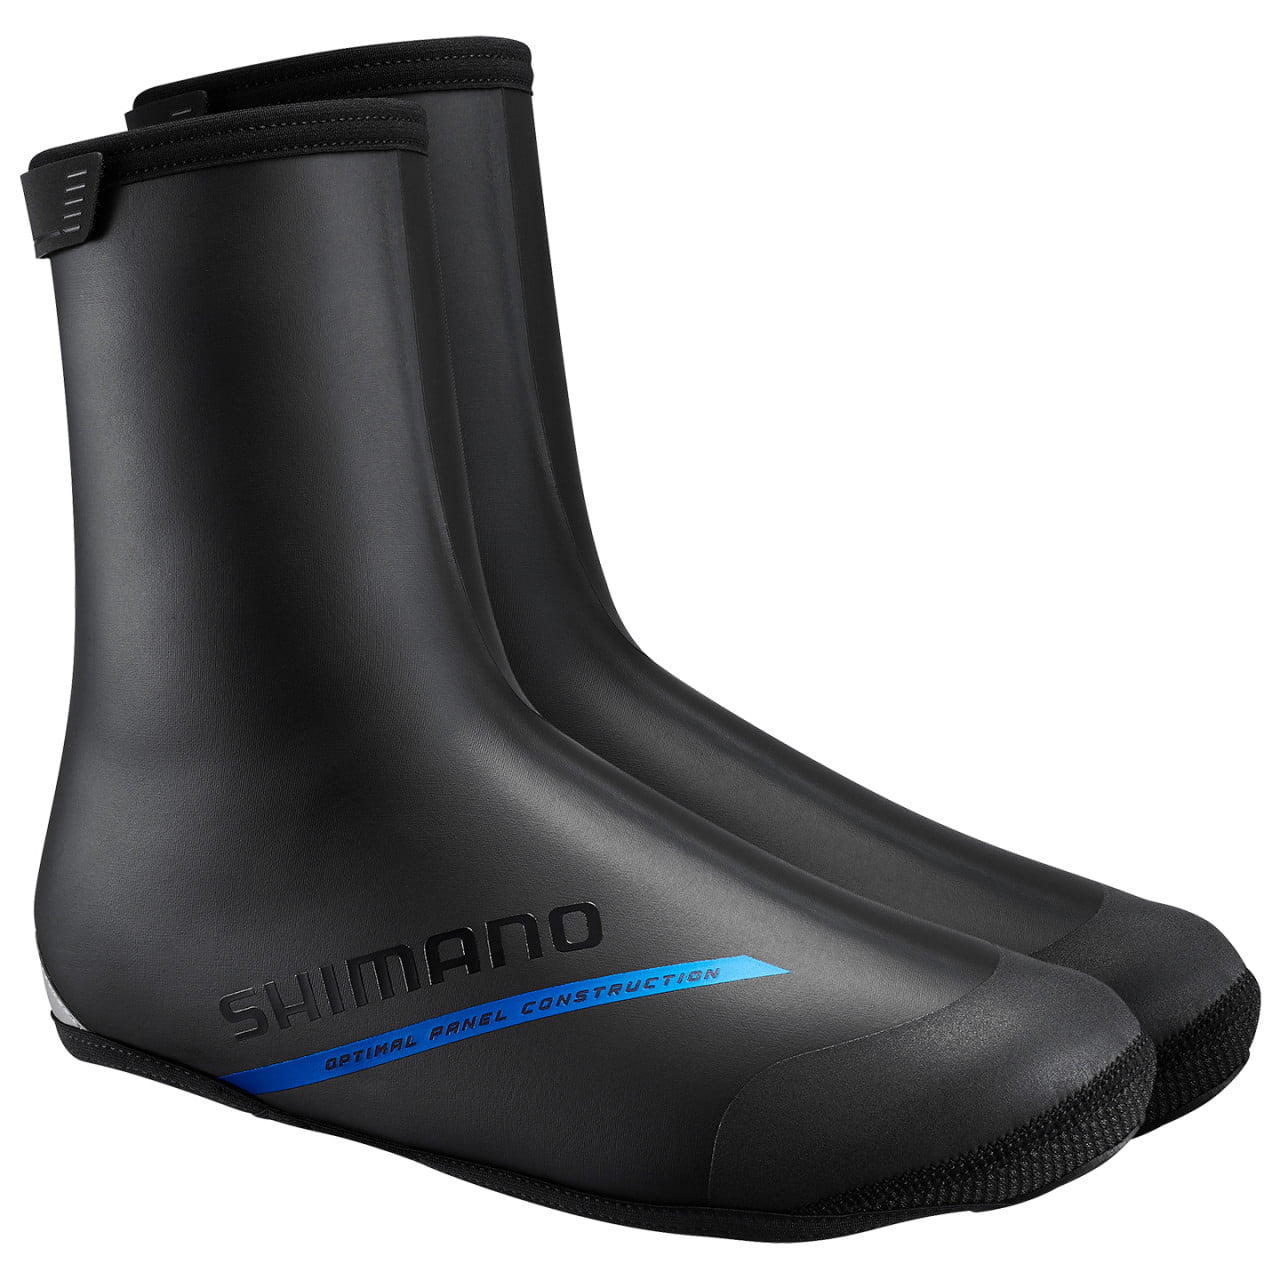 XC Thermal MTB Thermal Shoe Covers